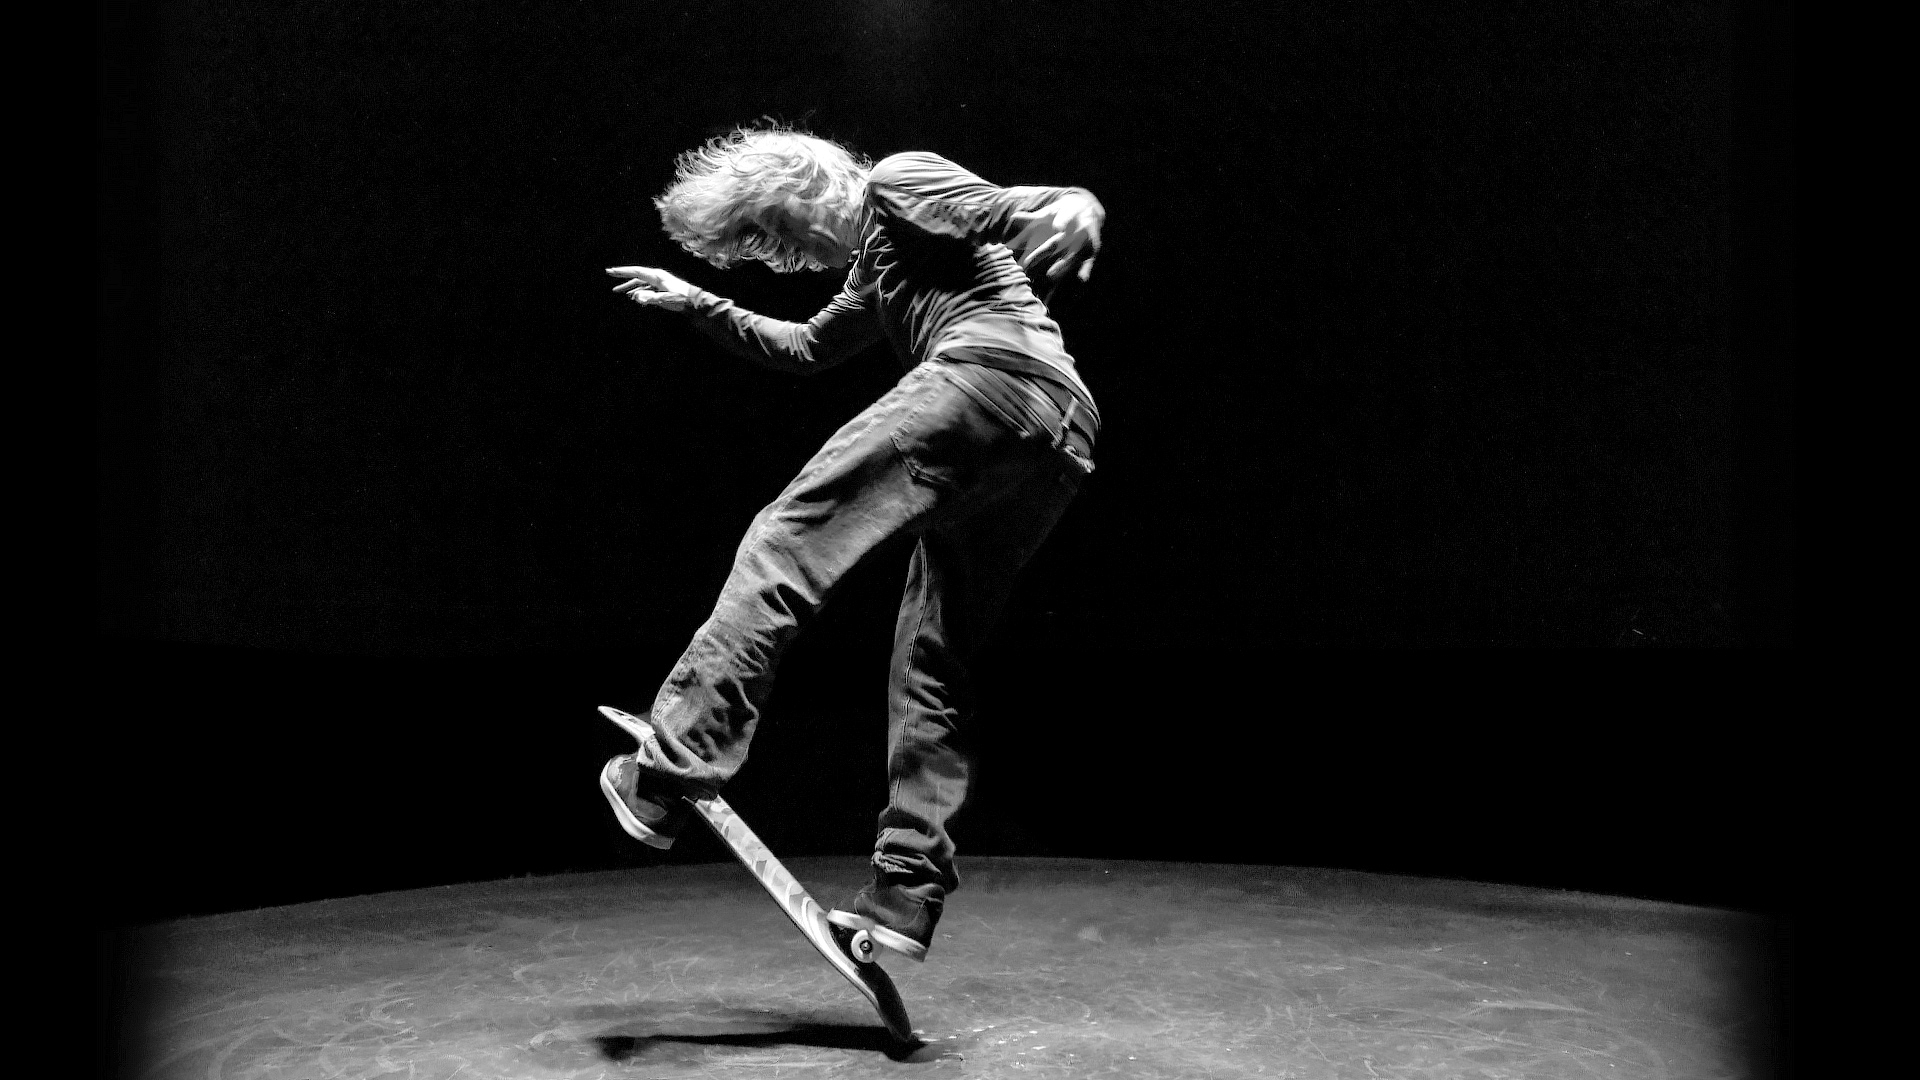 Rodney Mullen freestyle skateboarding. Photo credits to Rolling Stone.